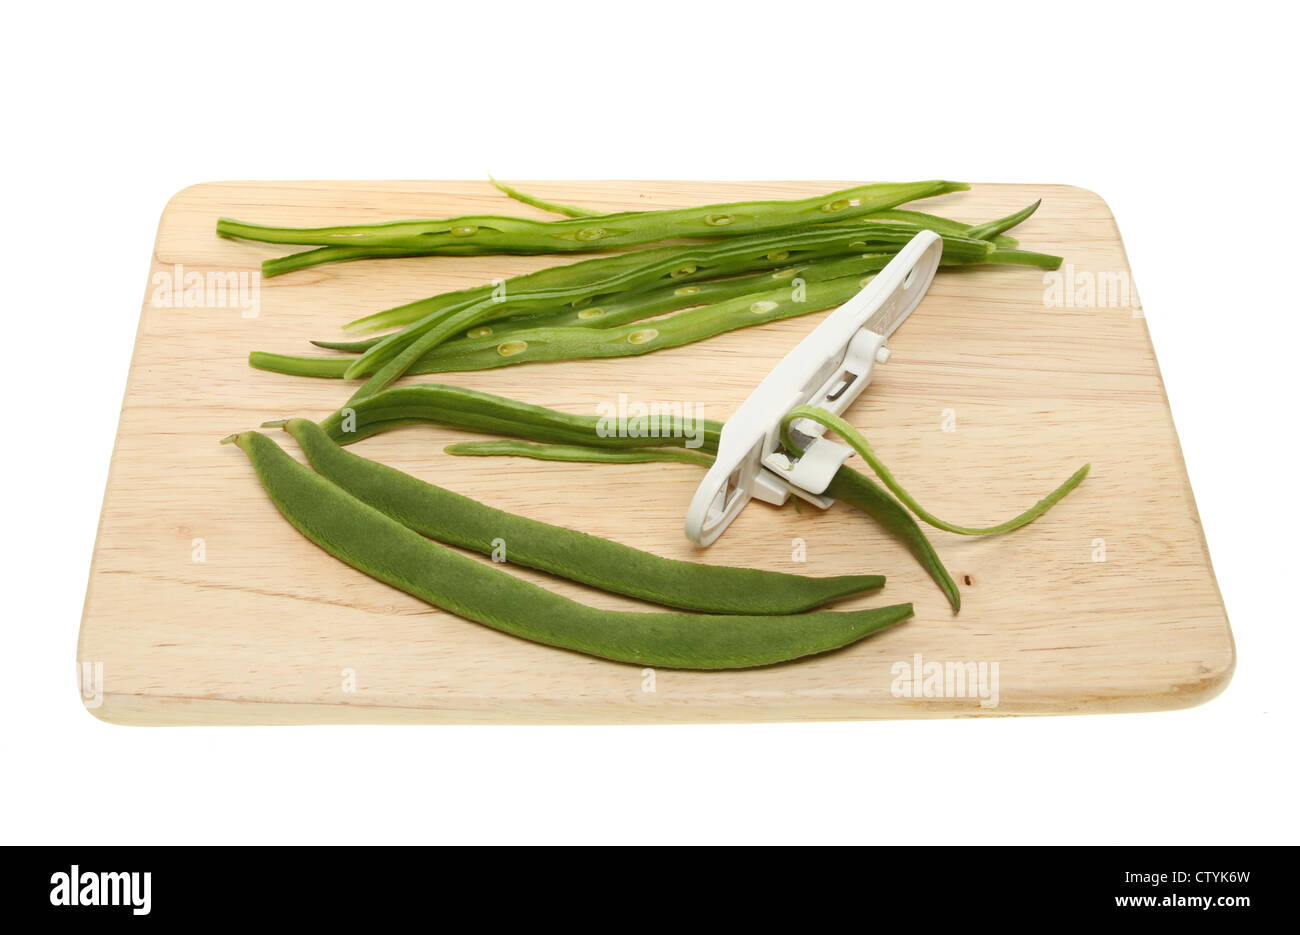 Preparation of runner beans on a wooden board isolated against white Stock Photo